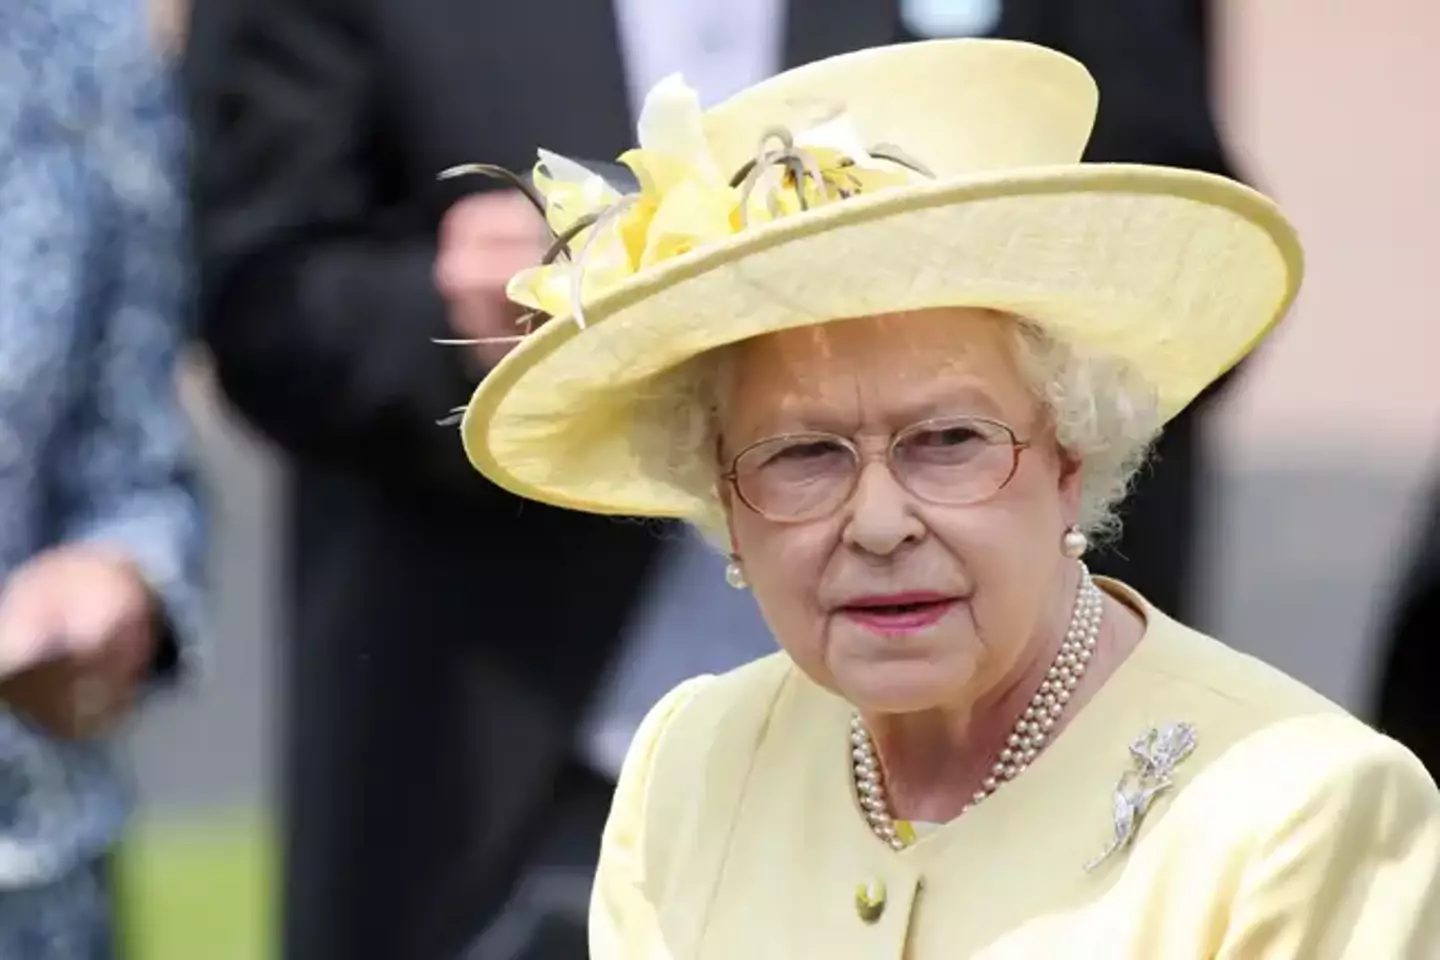 The Queen passed away aged 96.